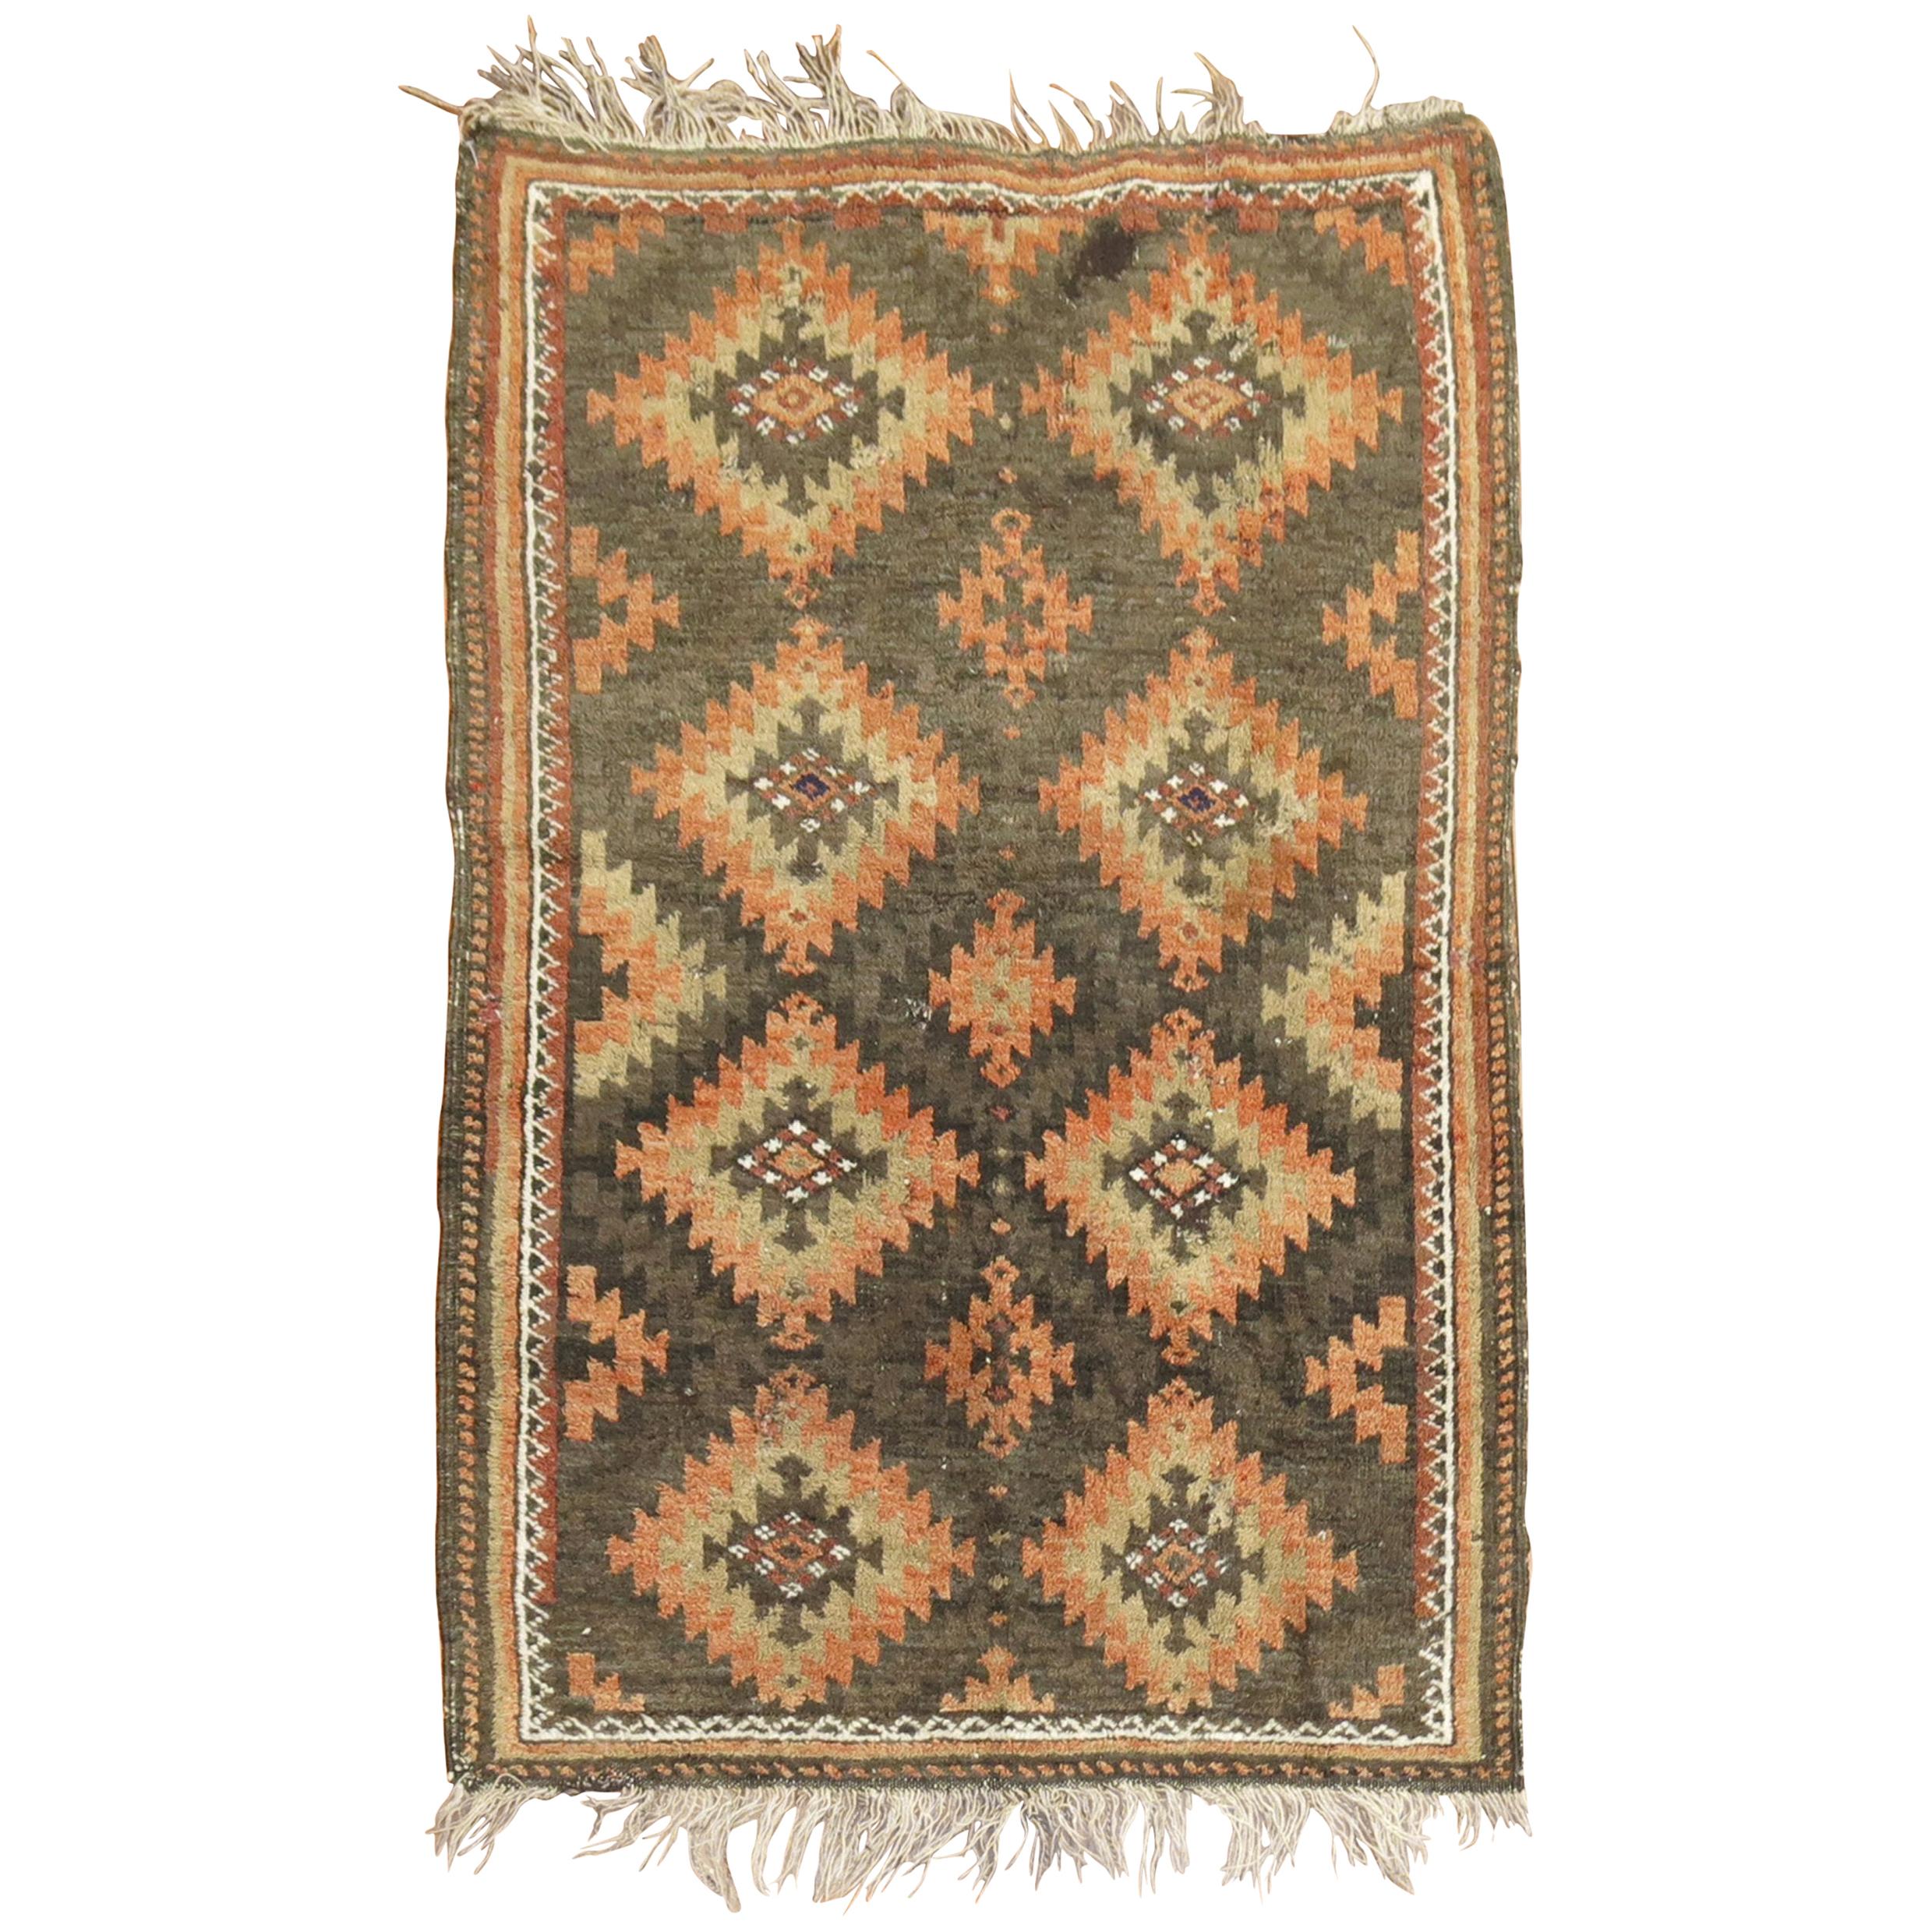 Tribal Brown Orange Color Persian Balouch Rug For Sale